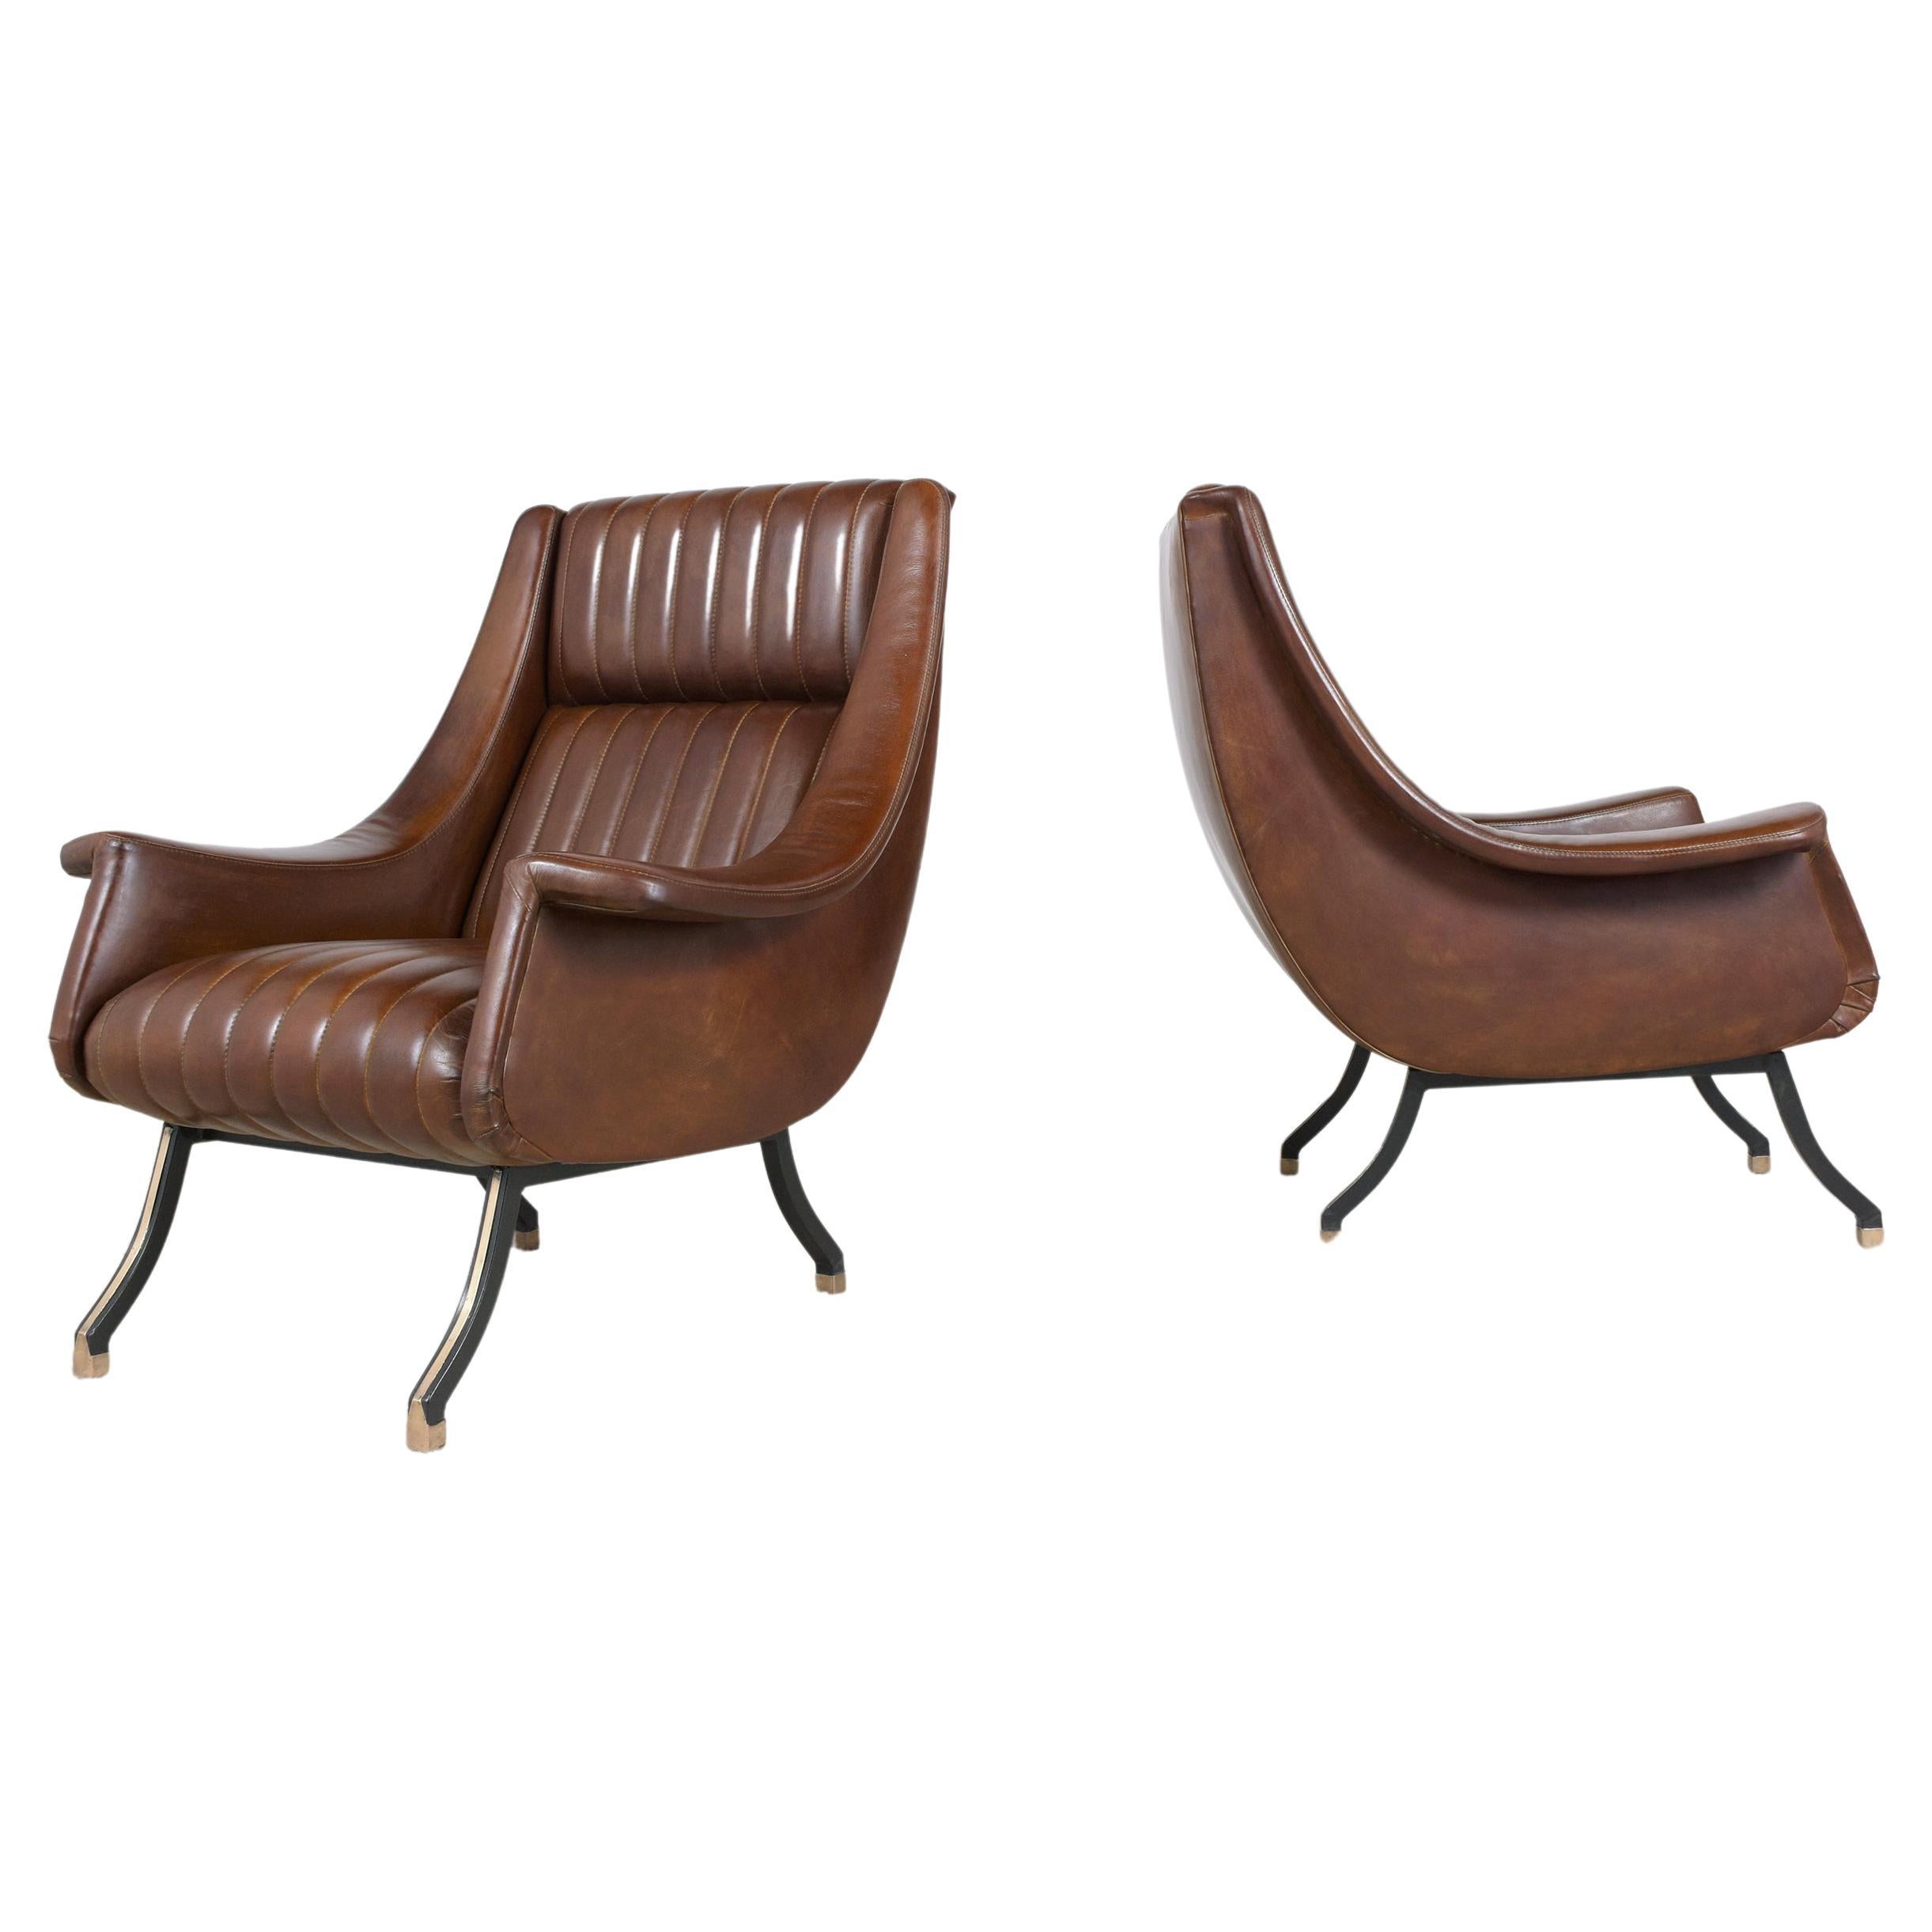 Pair of Vintage Mid-Century Modern Leather Lounge Chairs